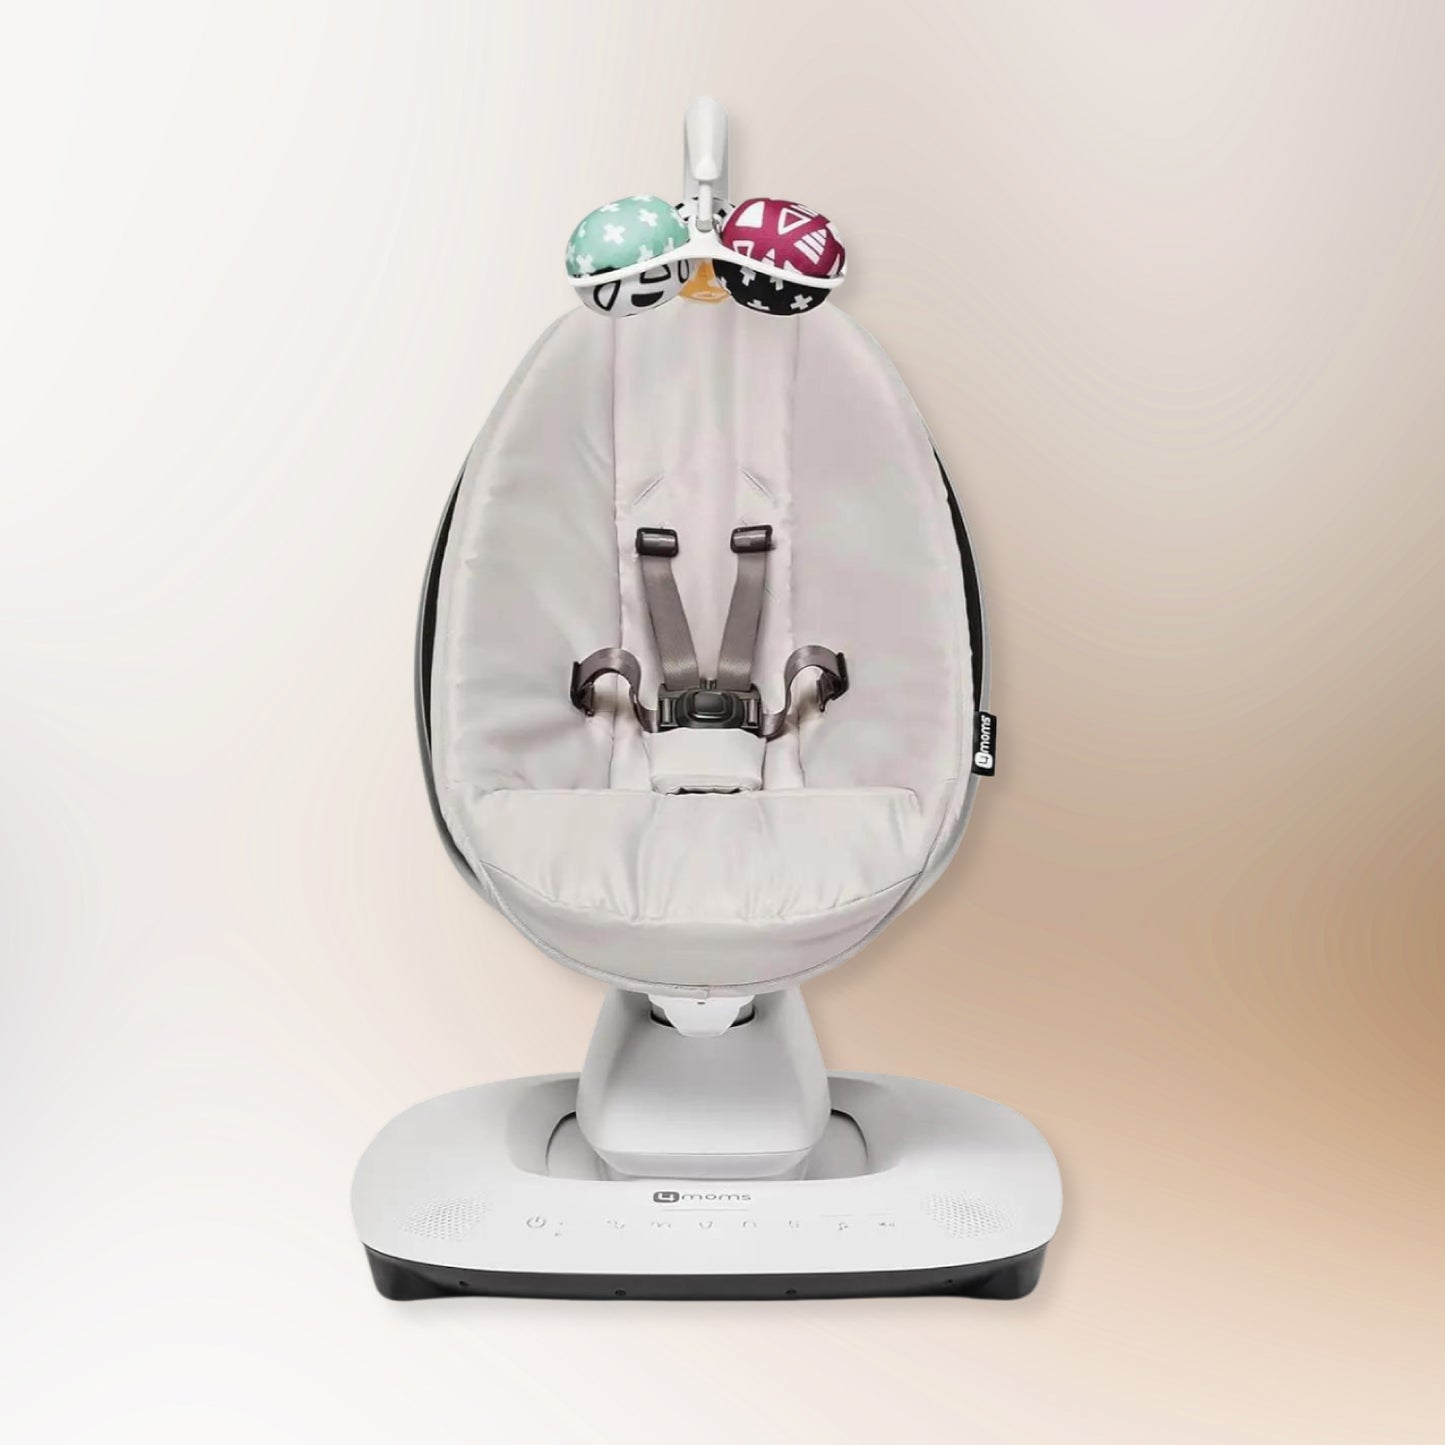 Grey MamaRoo Multi-Motion Baby Swing featuring a machine-washable seat cover, removable toy bar, and app compatibility for customizable motions and sounds.